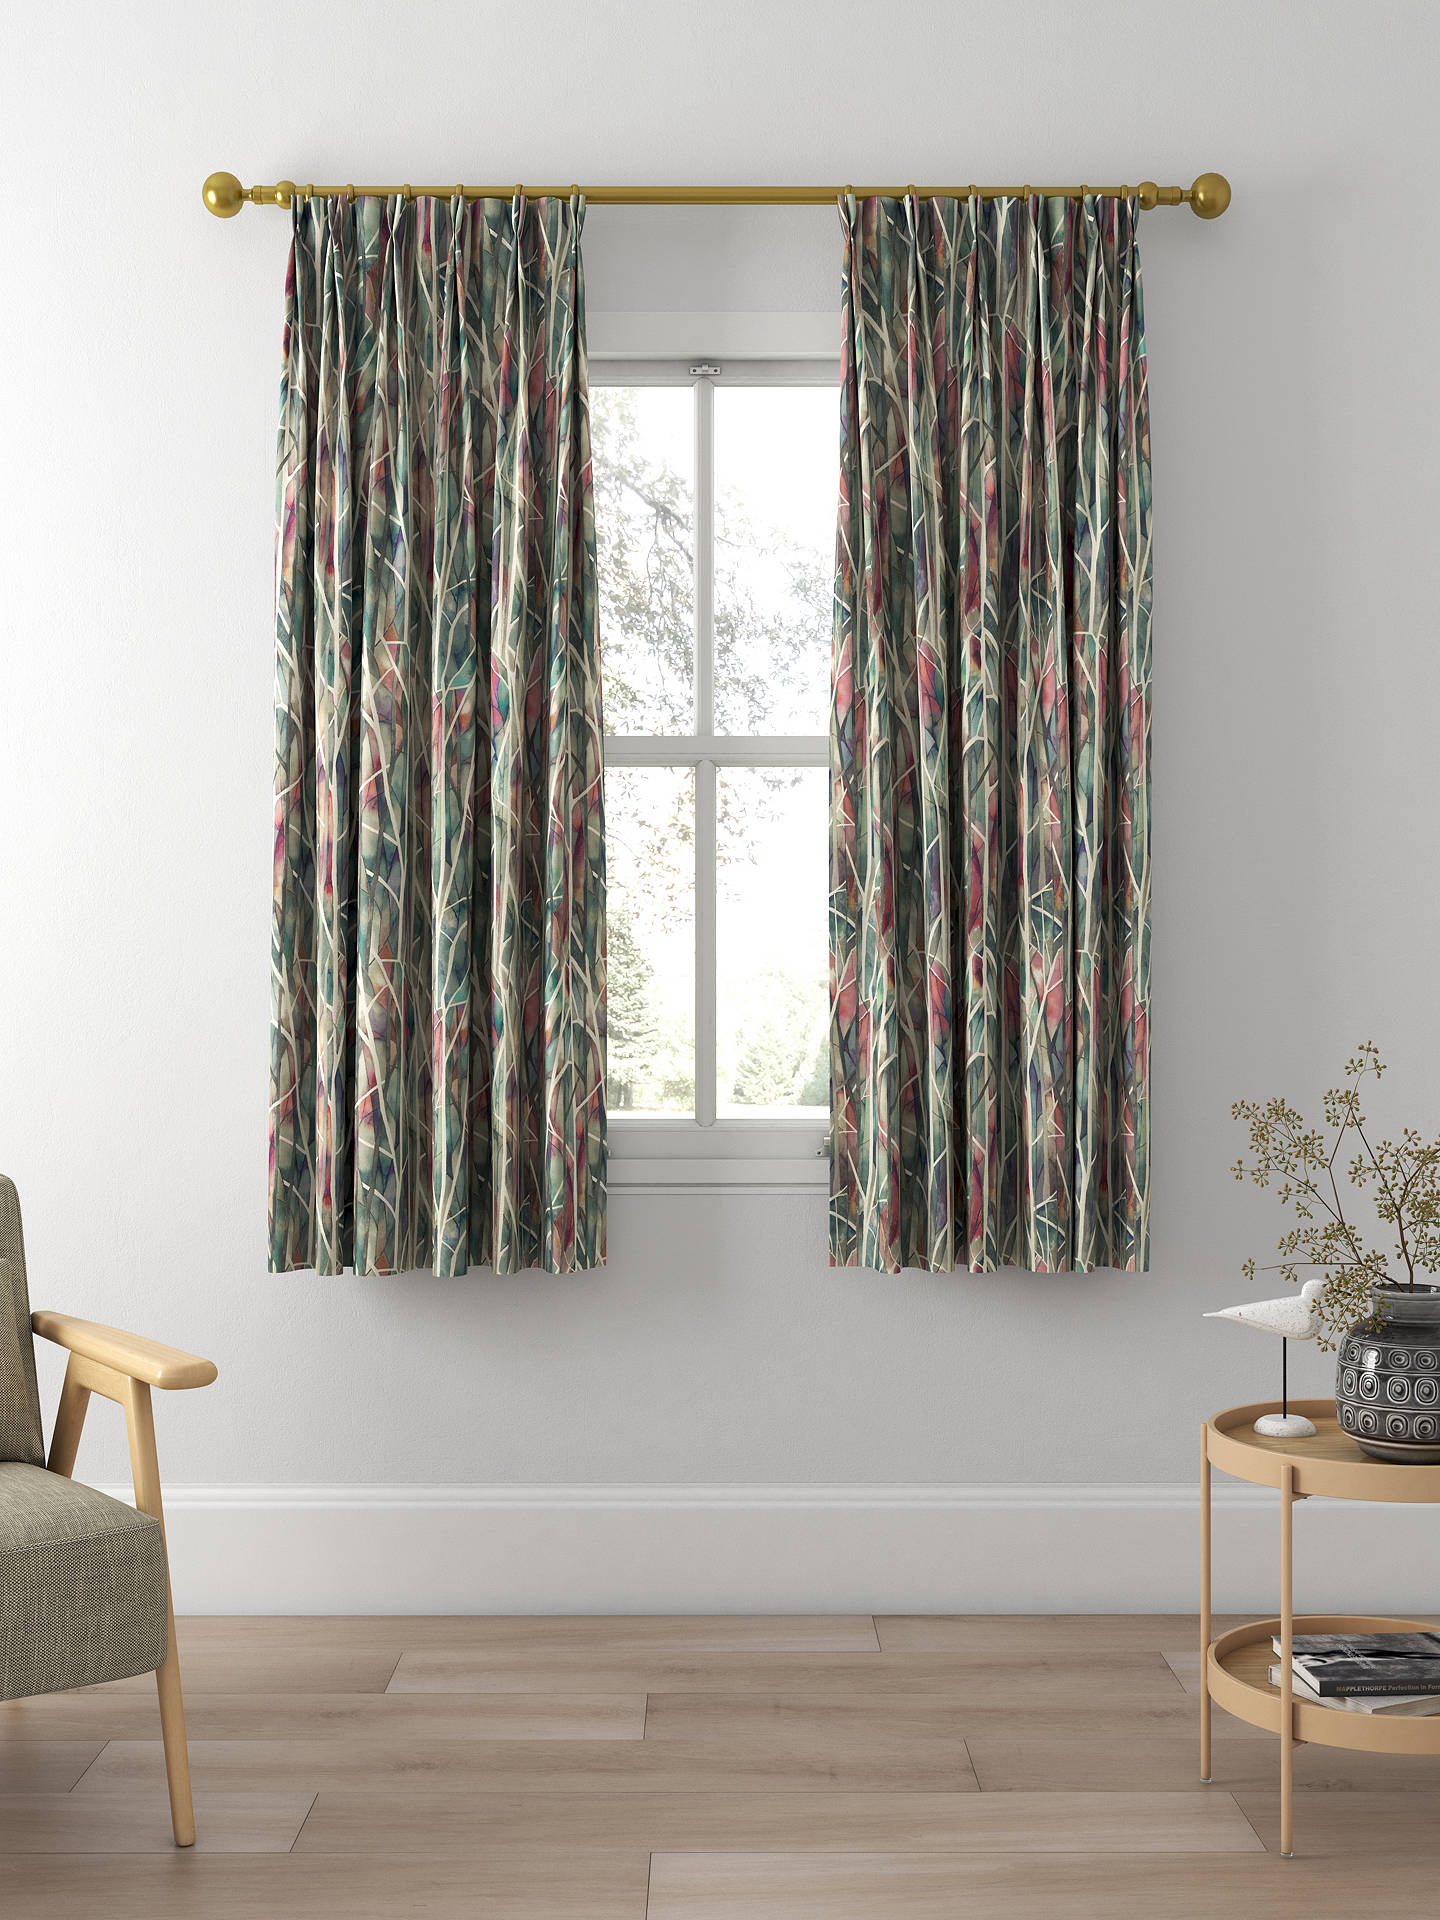 Voyage Woodbury Made to Measure Curtains, Pomegranate